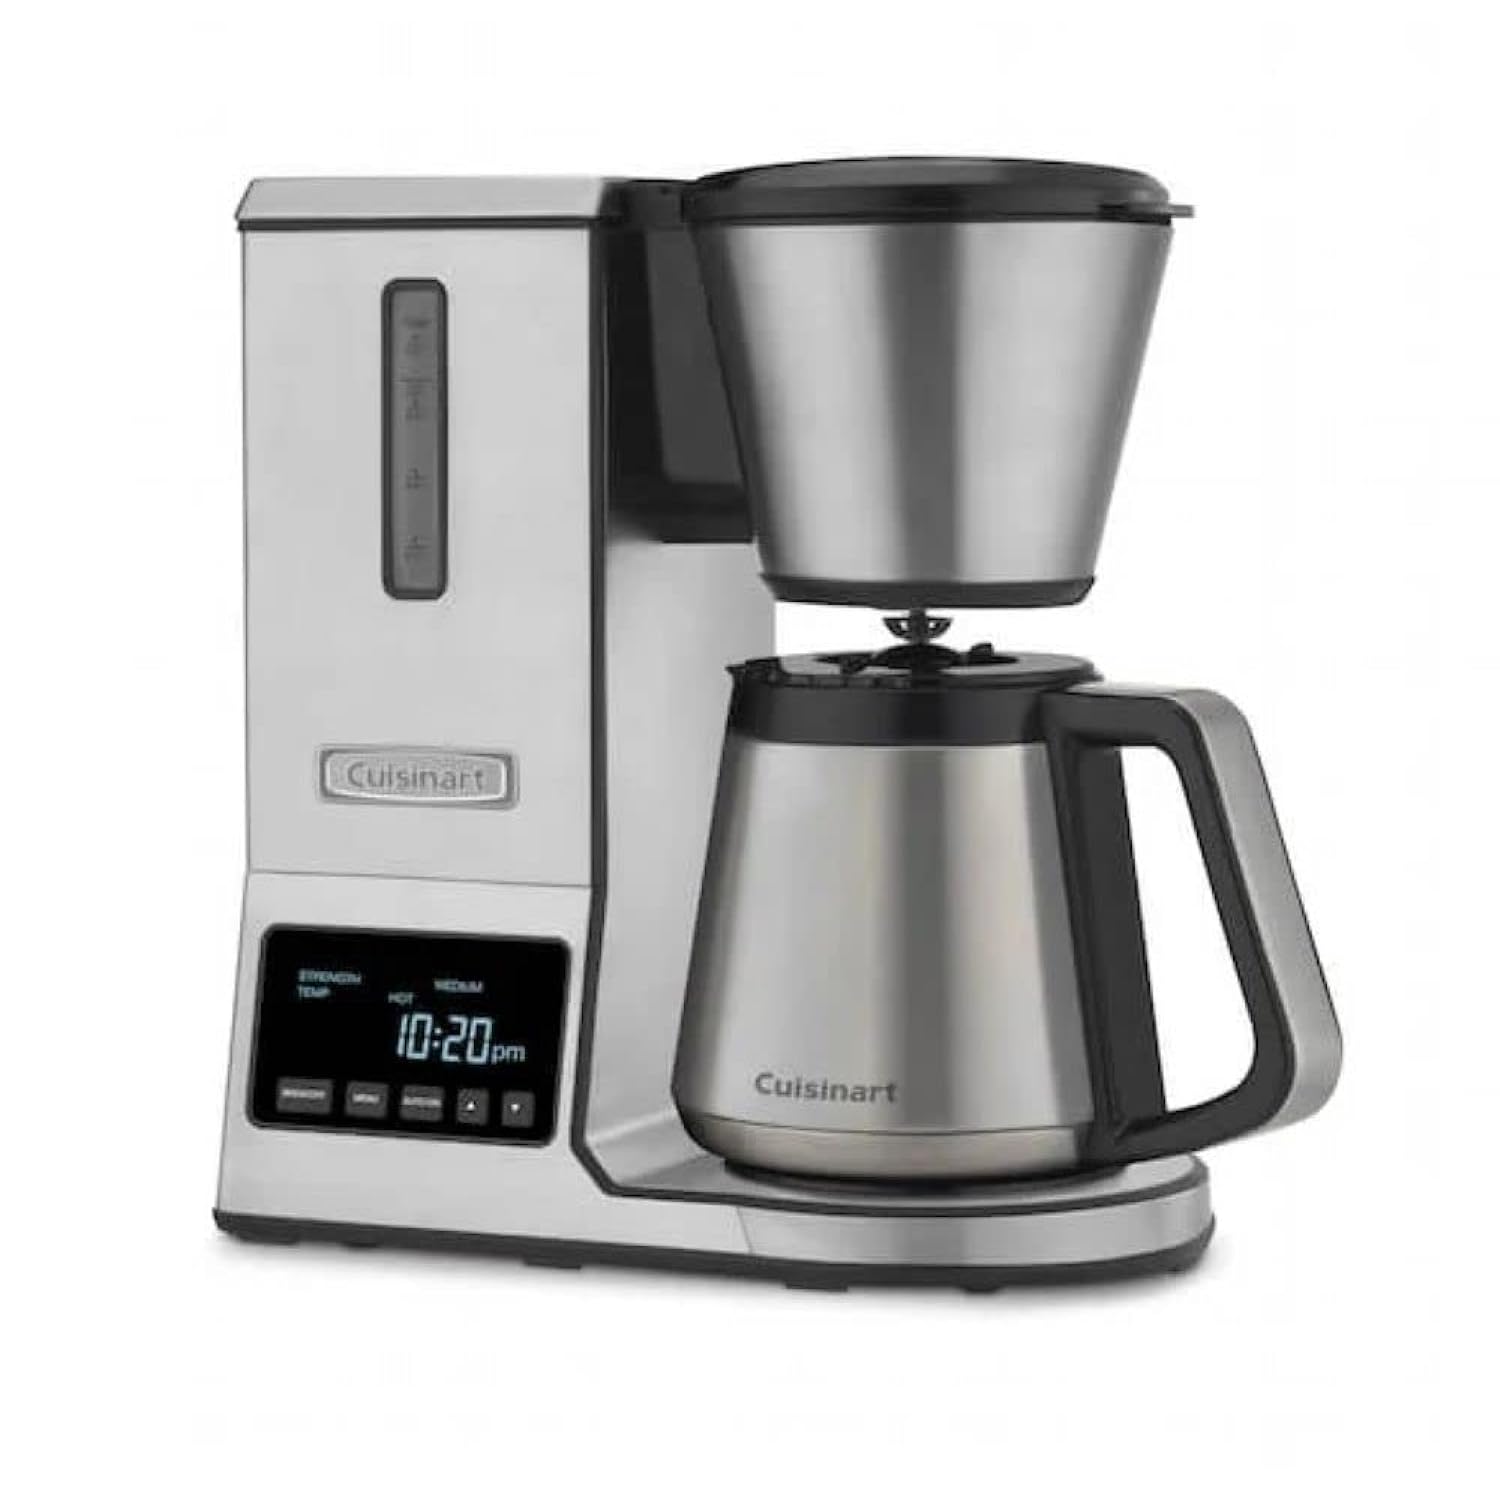 Cuisinart Cpo850 Coffee Brewer, 8 Cup, Stainless Steel